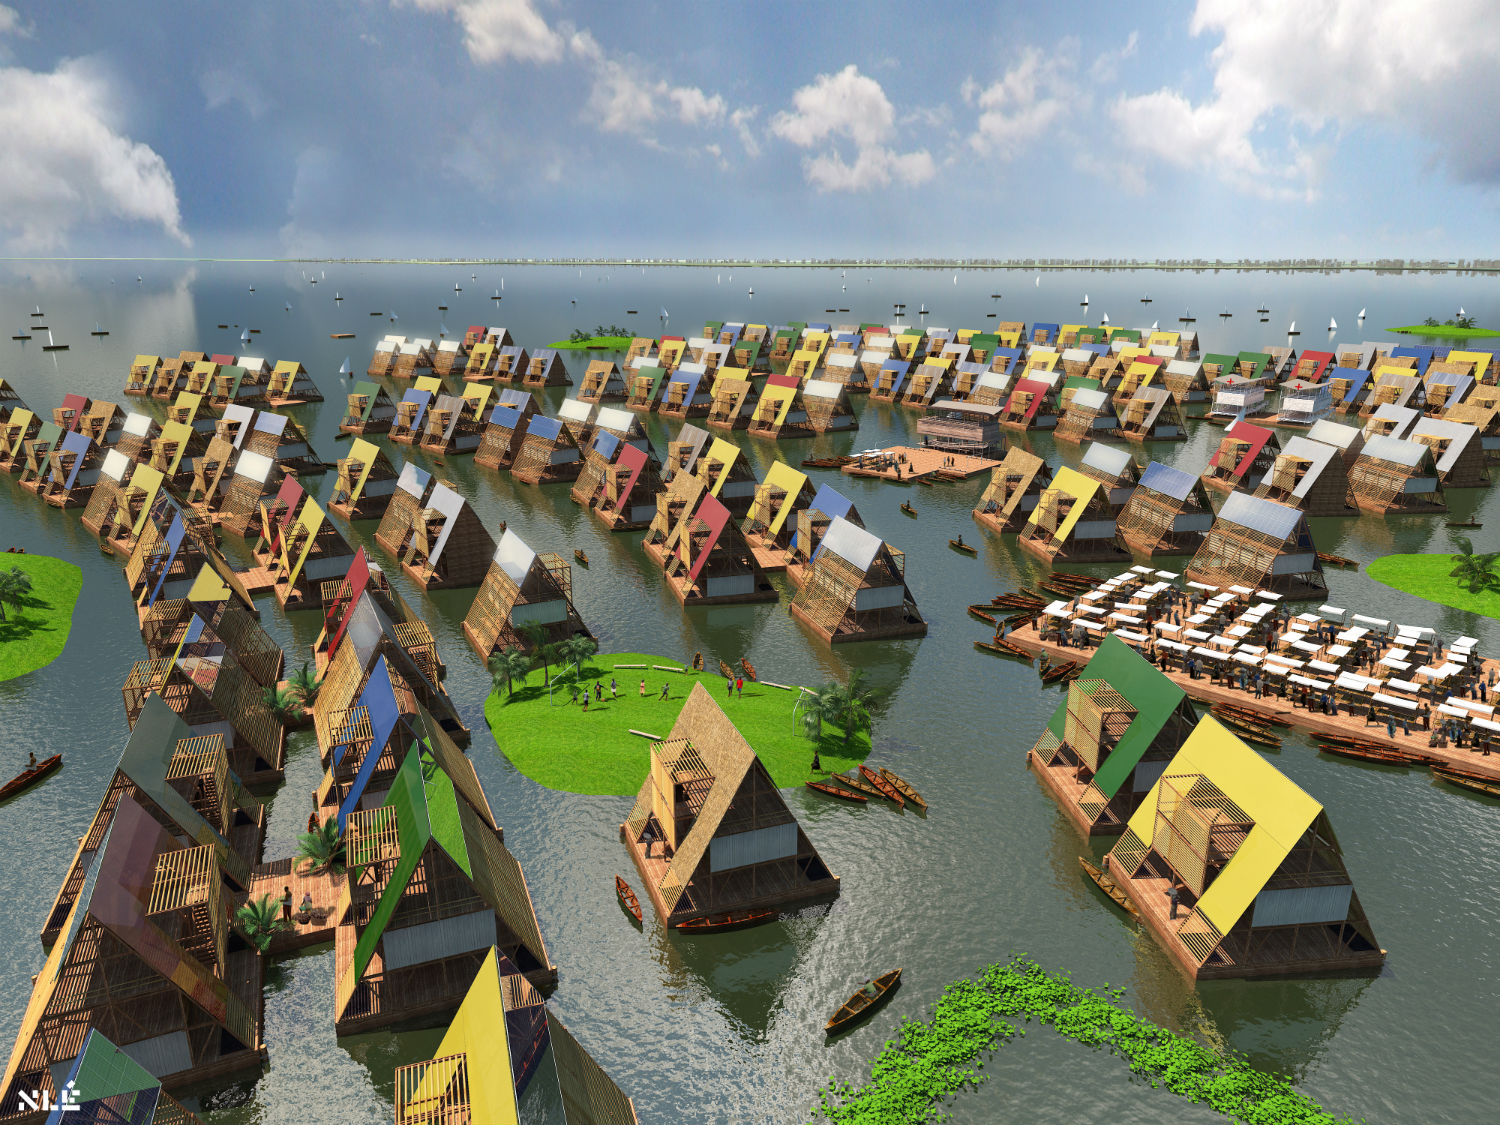 In Nigeria, the impacts of climate change combine with soil erosion, deforestation and subsidence to make flooding a growing problem. In 2012, floods displaced 2.1 million people. Architecture firm NLE has been working with the residents of a 100,000-strong waterside slum district in Lagos to create floating homes in a lagoon
